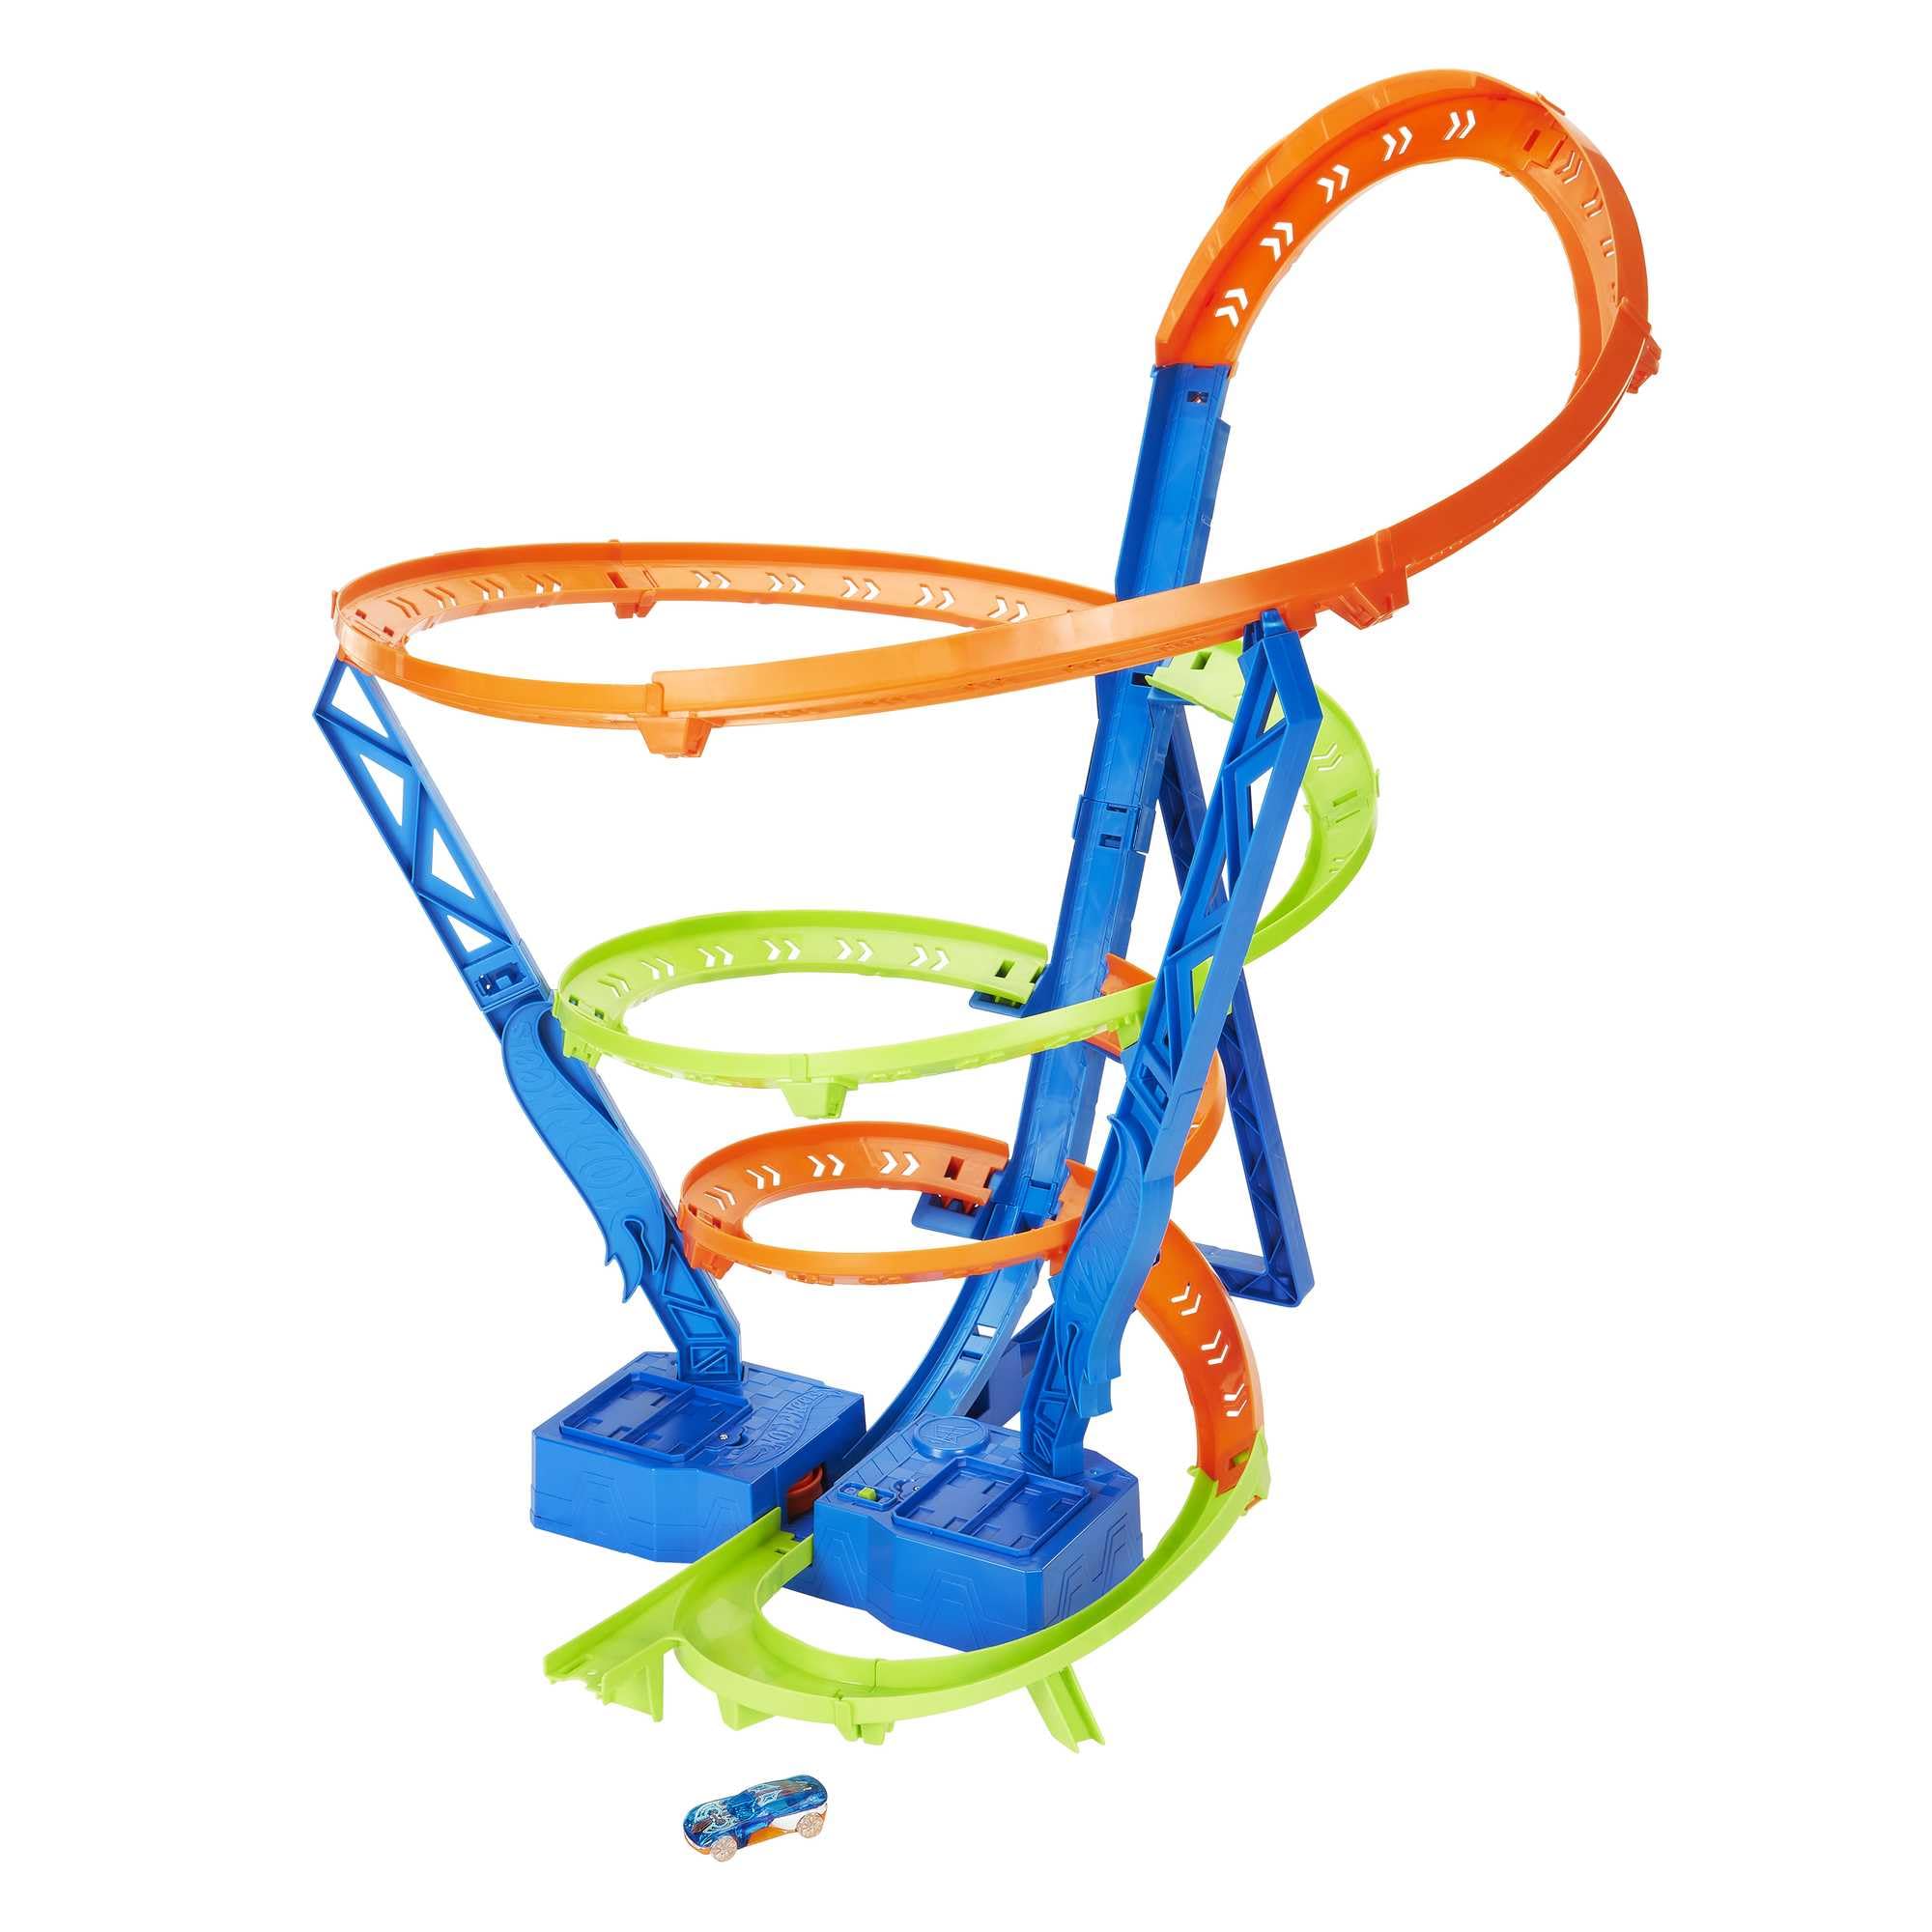 Hot Wheels Action Spiral Speed Crash Track Set (HGV67) $30 + Free Shipping w/ Prime or on $35+